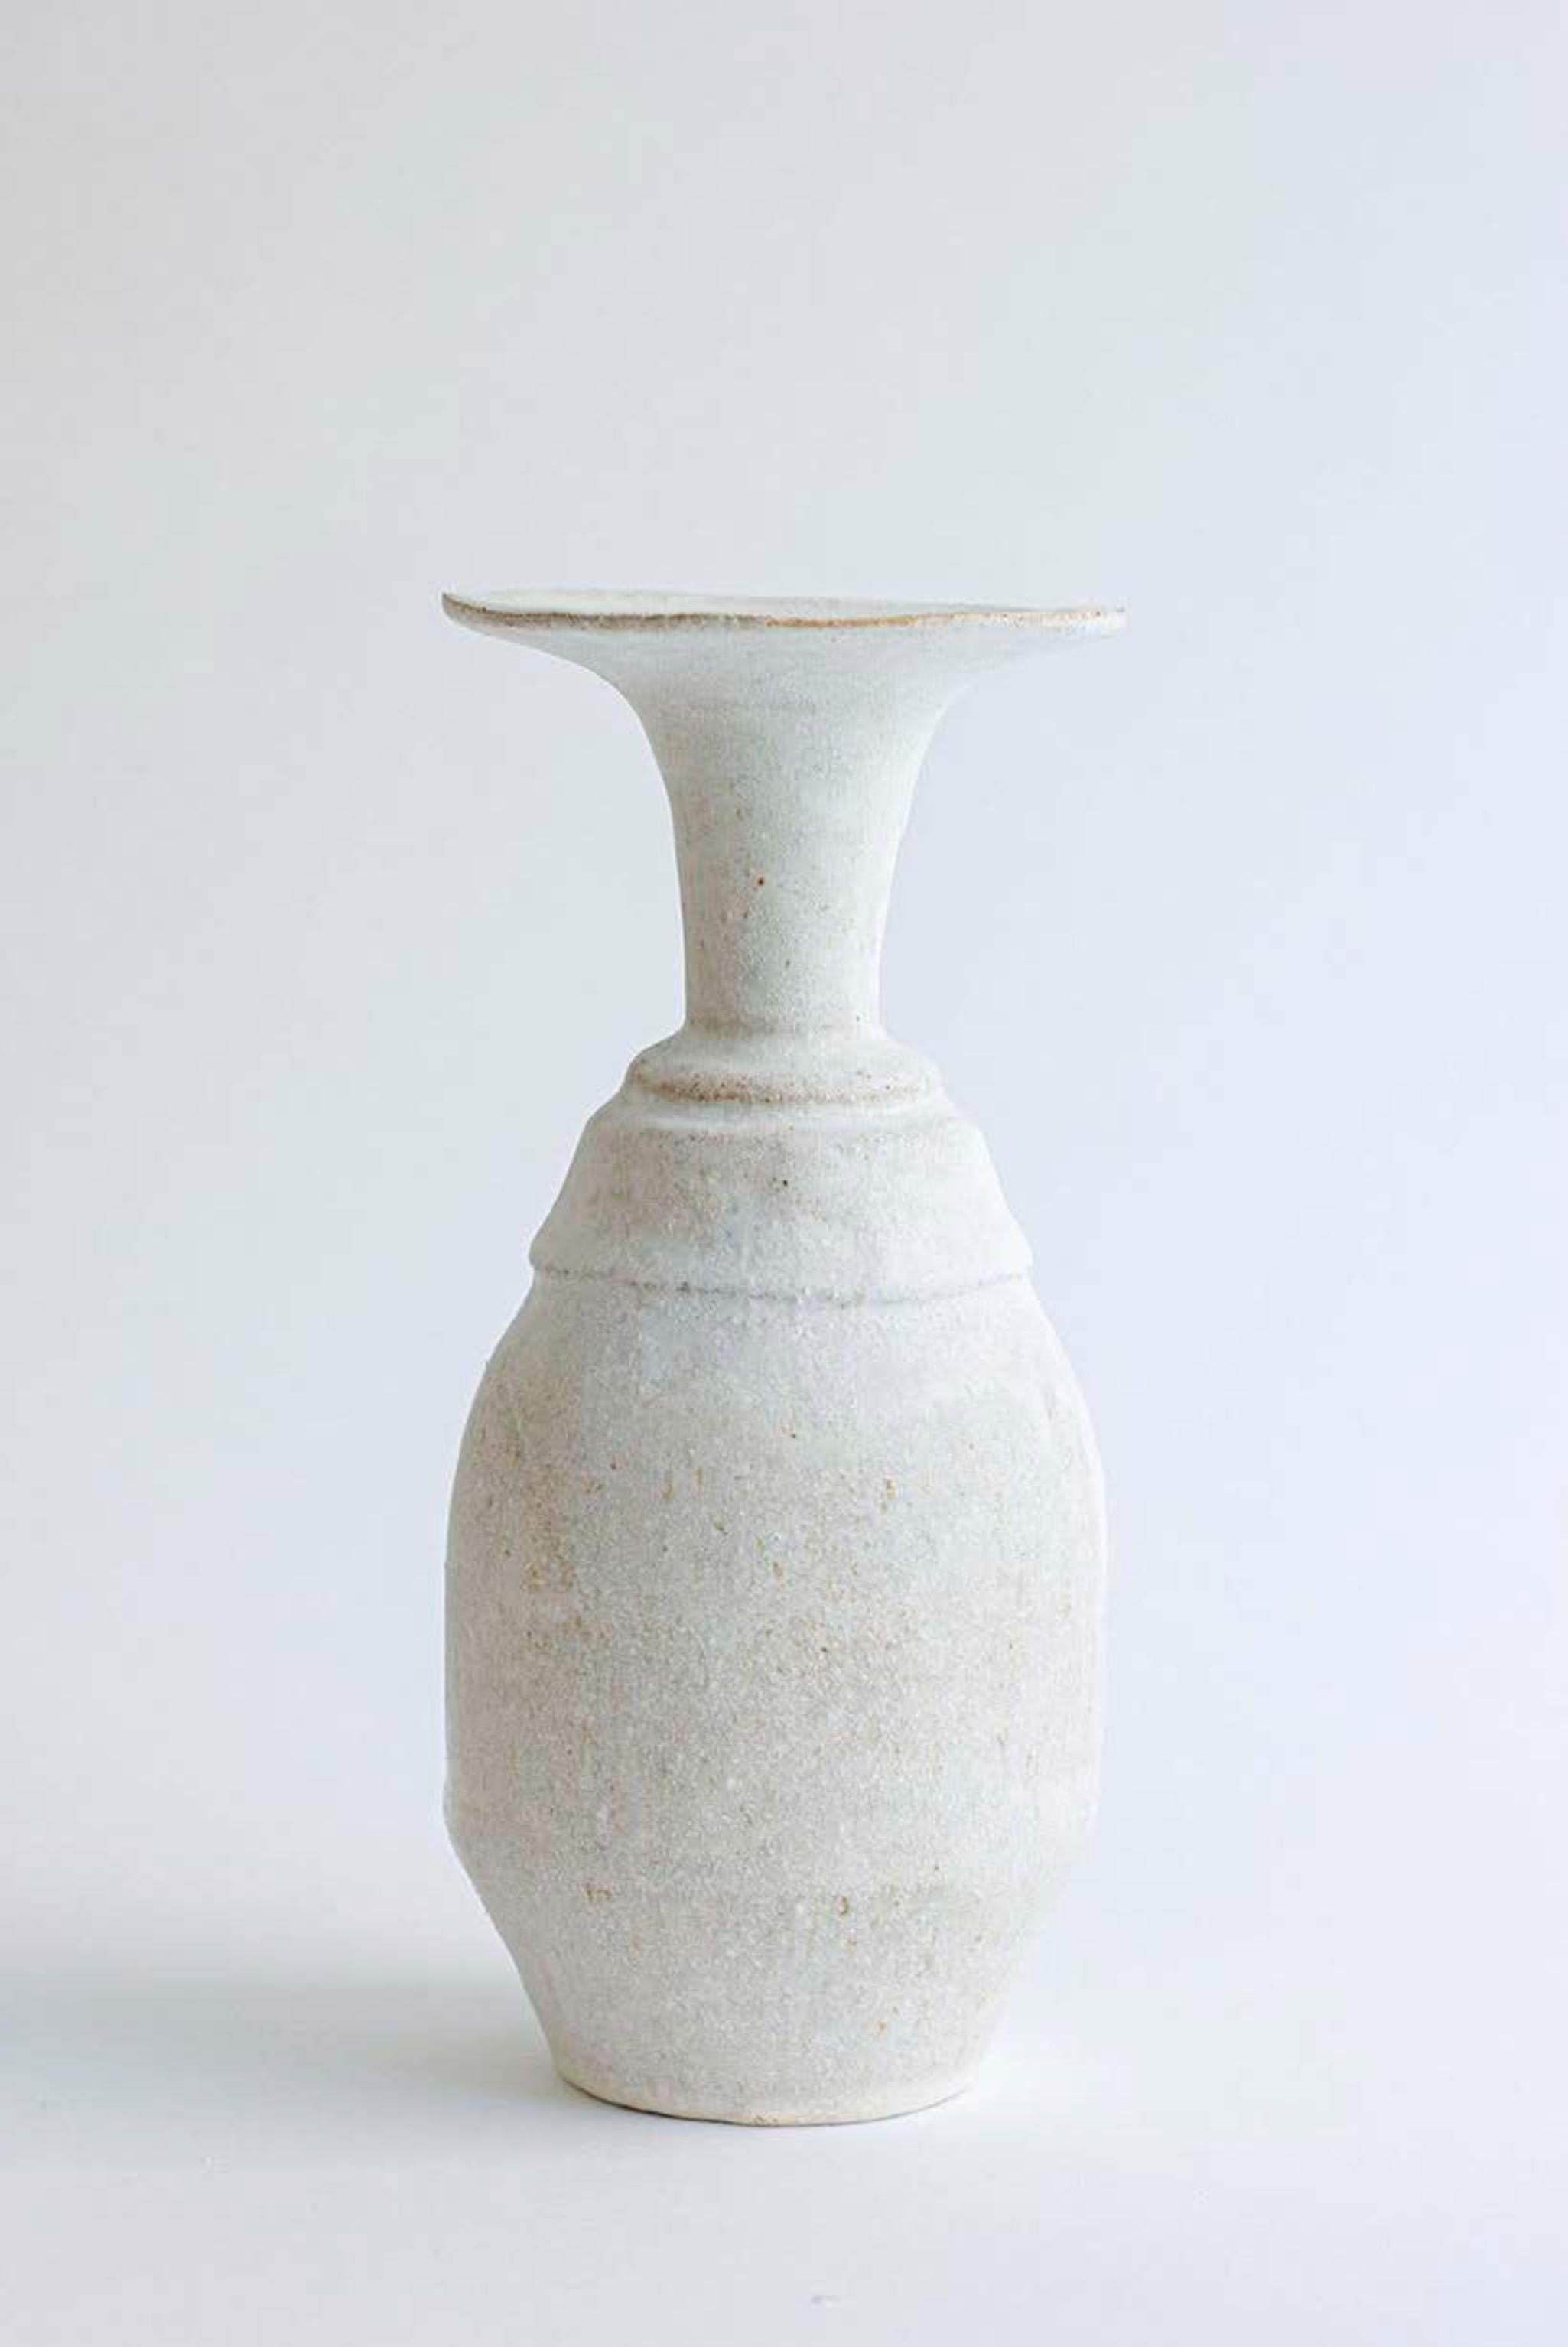 Unique Arq 011 Blanco, Hueso vase by Raquel Vidal and Pedro Paz
Dimensions: Ø 11.5 x 24 cm
Materials: hand-sculpted glazed stoneware.

The Arq series emerged from our own past production. Drawing its inspiration from the field of archaeology, it